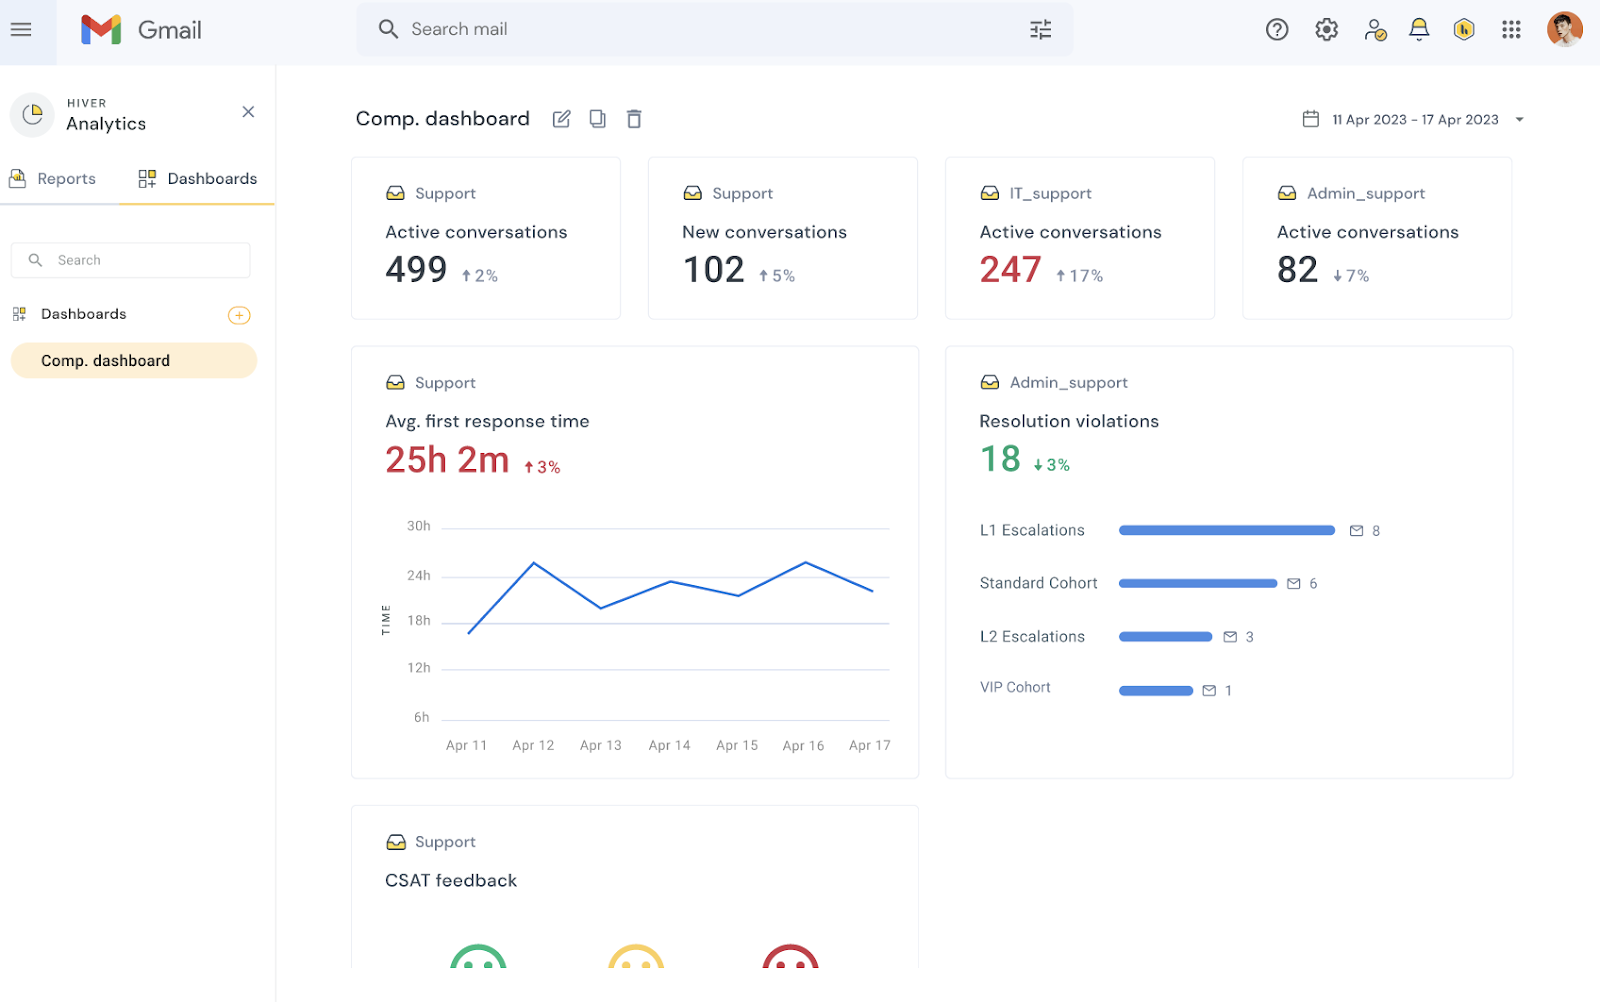 consolidated-dashboards-in-analytics